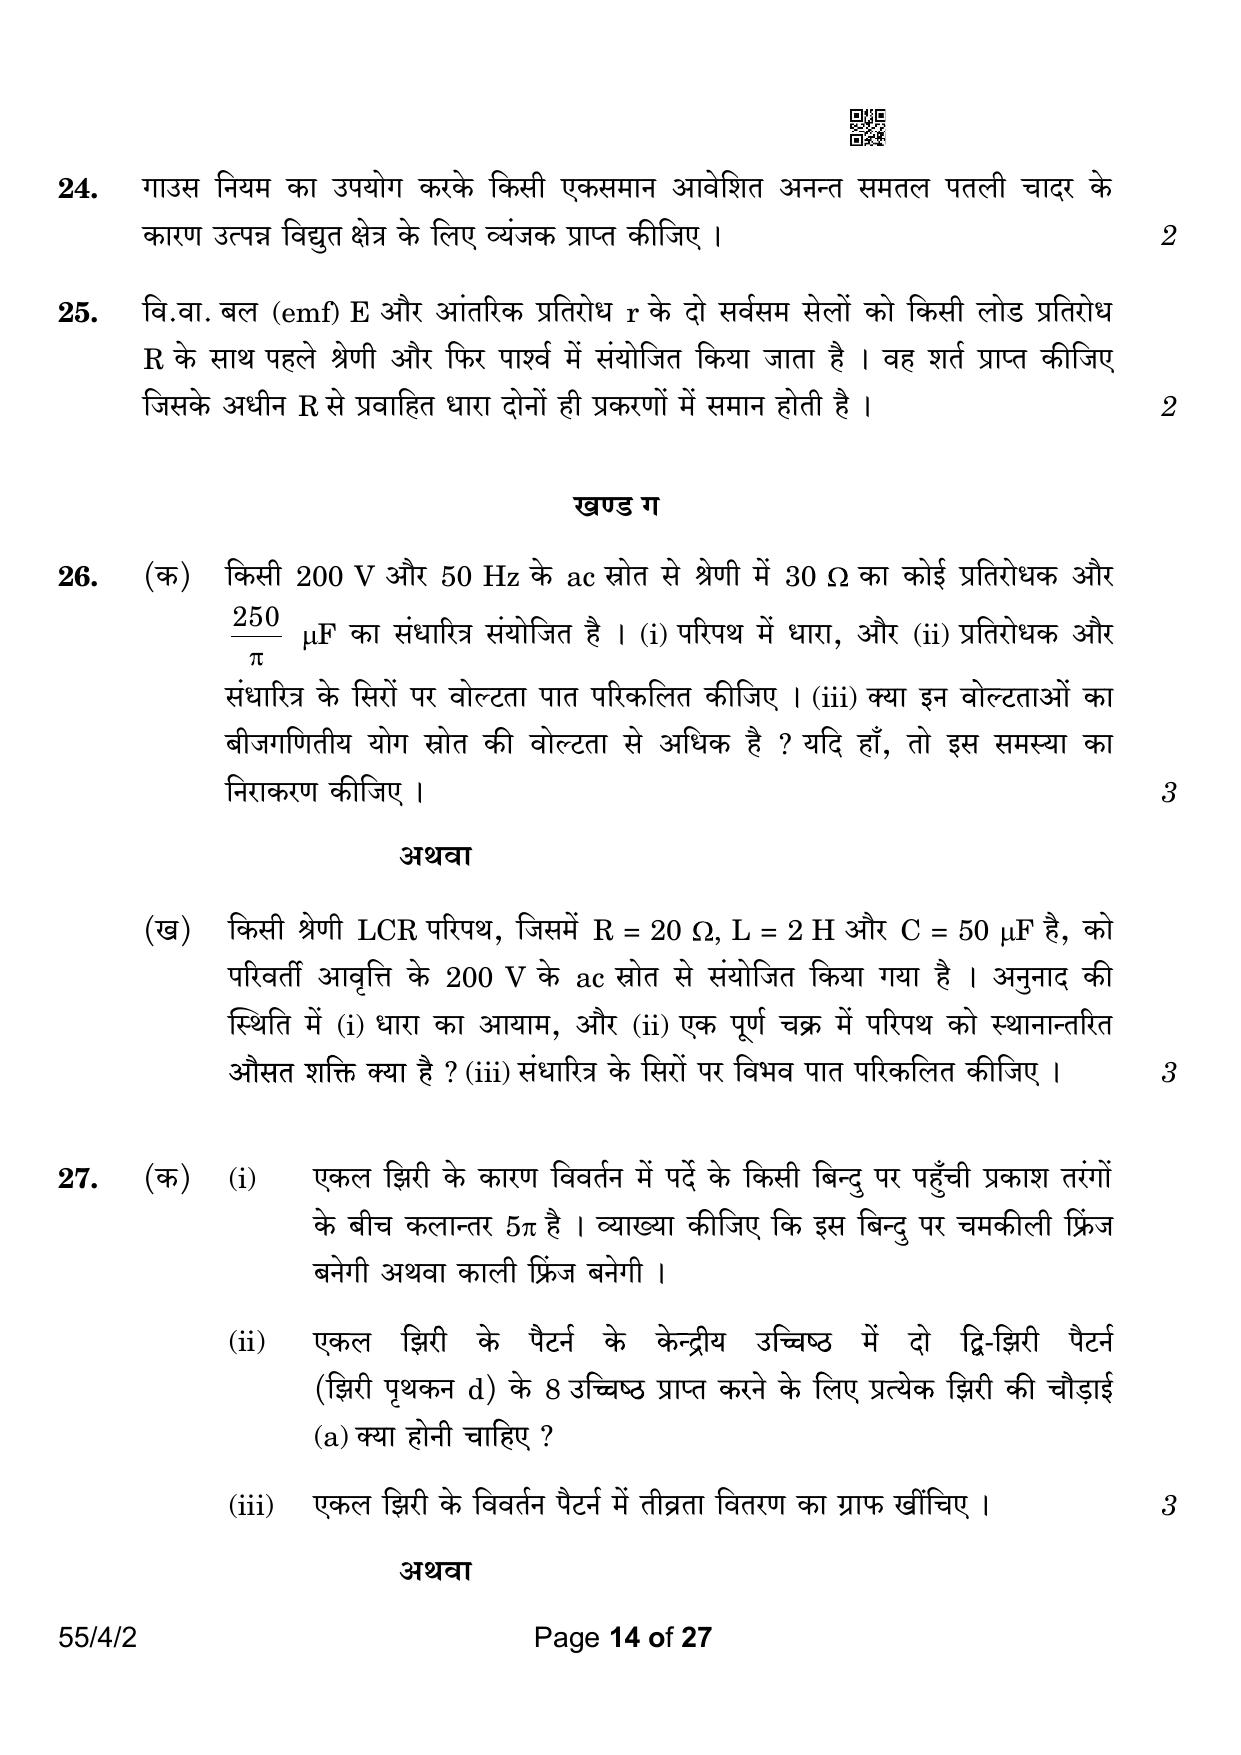 CBSE Class 12 55-4-2 Physics 2023 Question Paper - Page 14